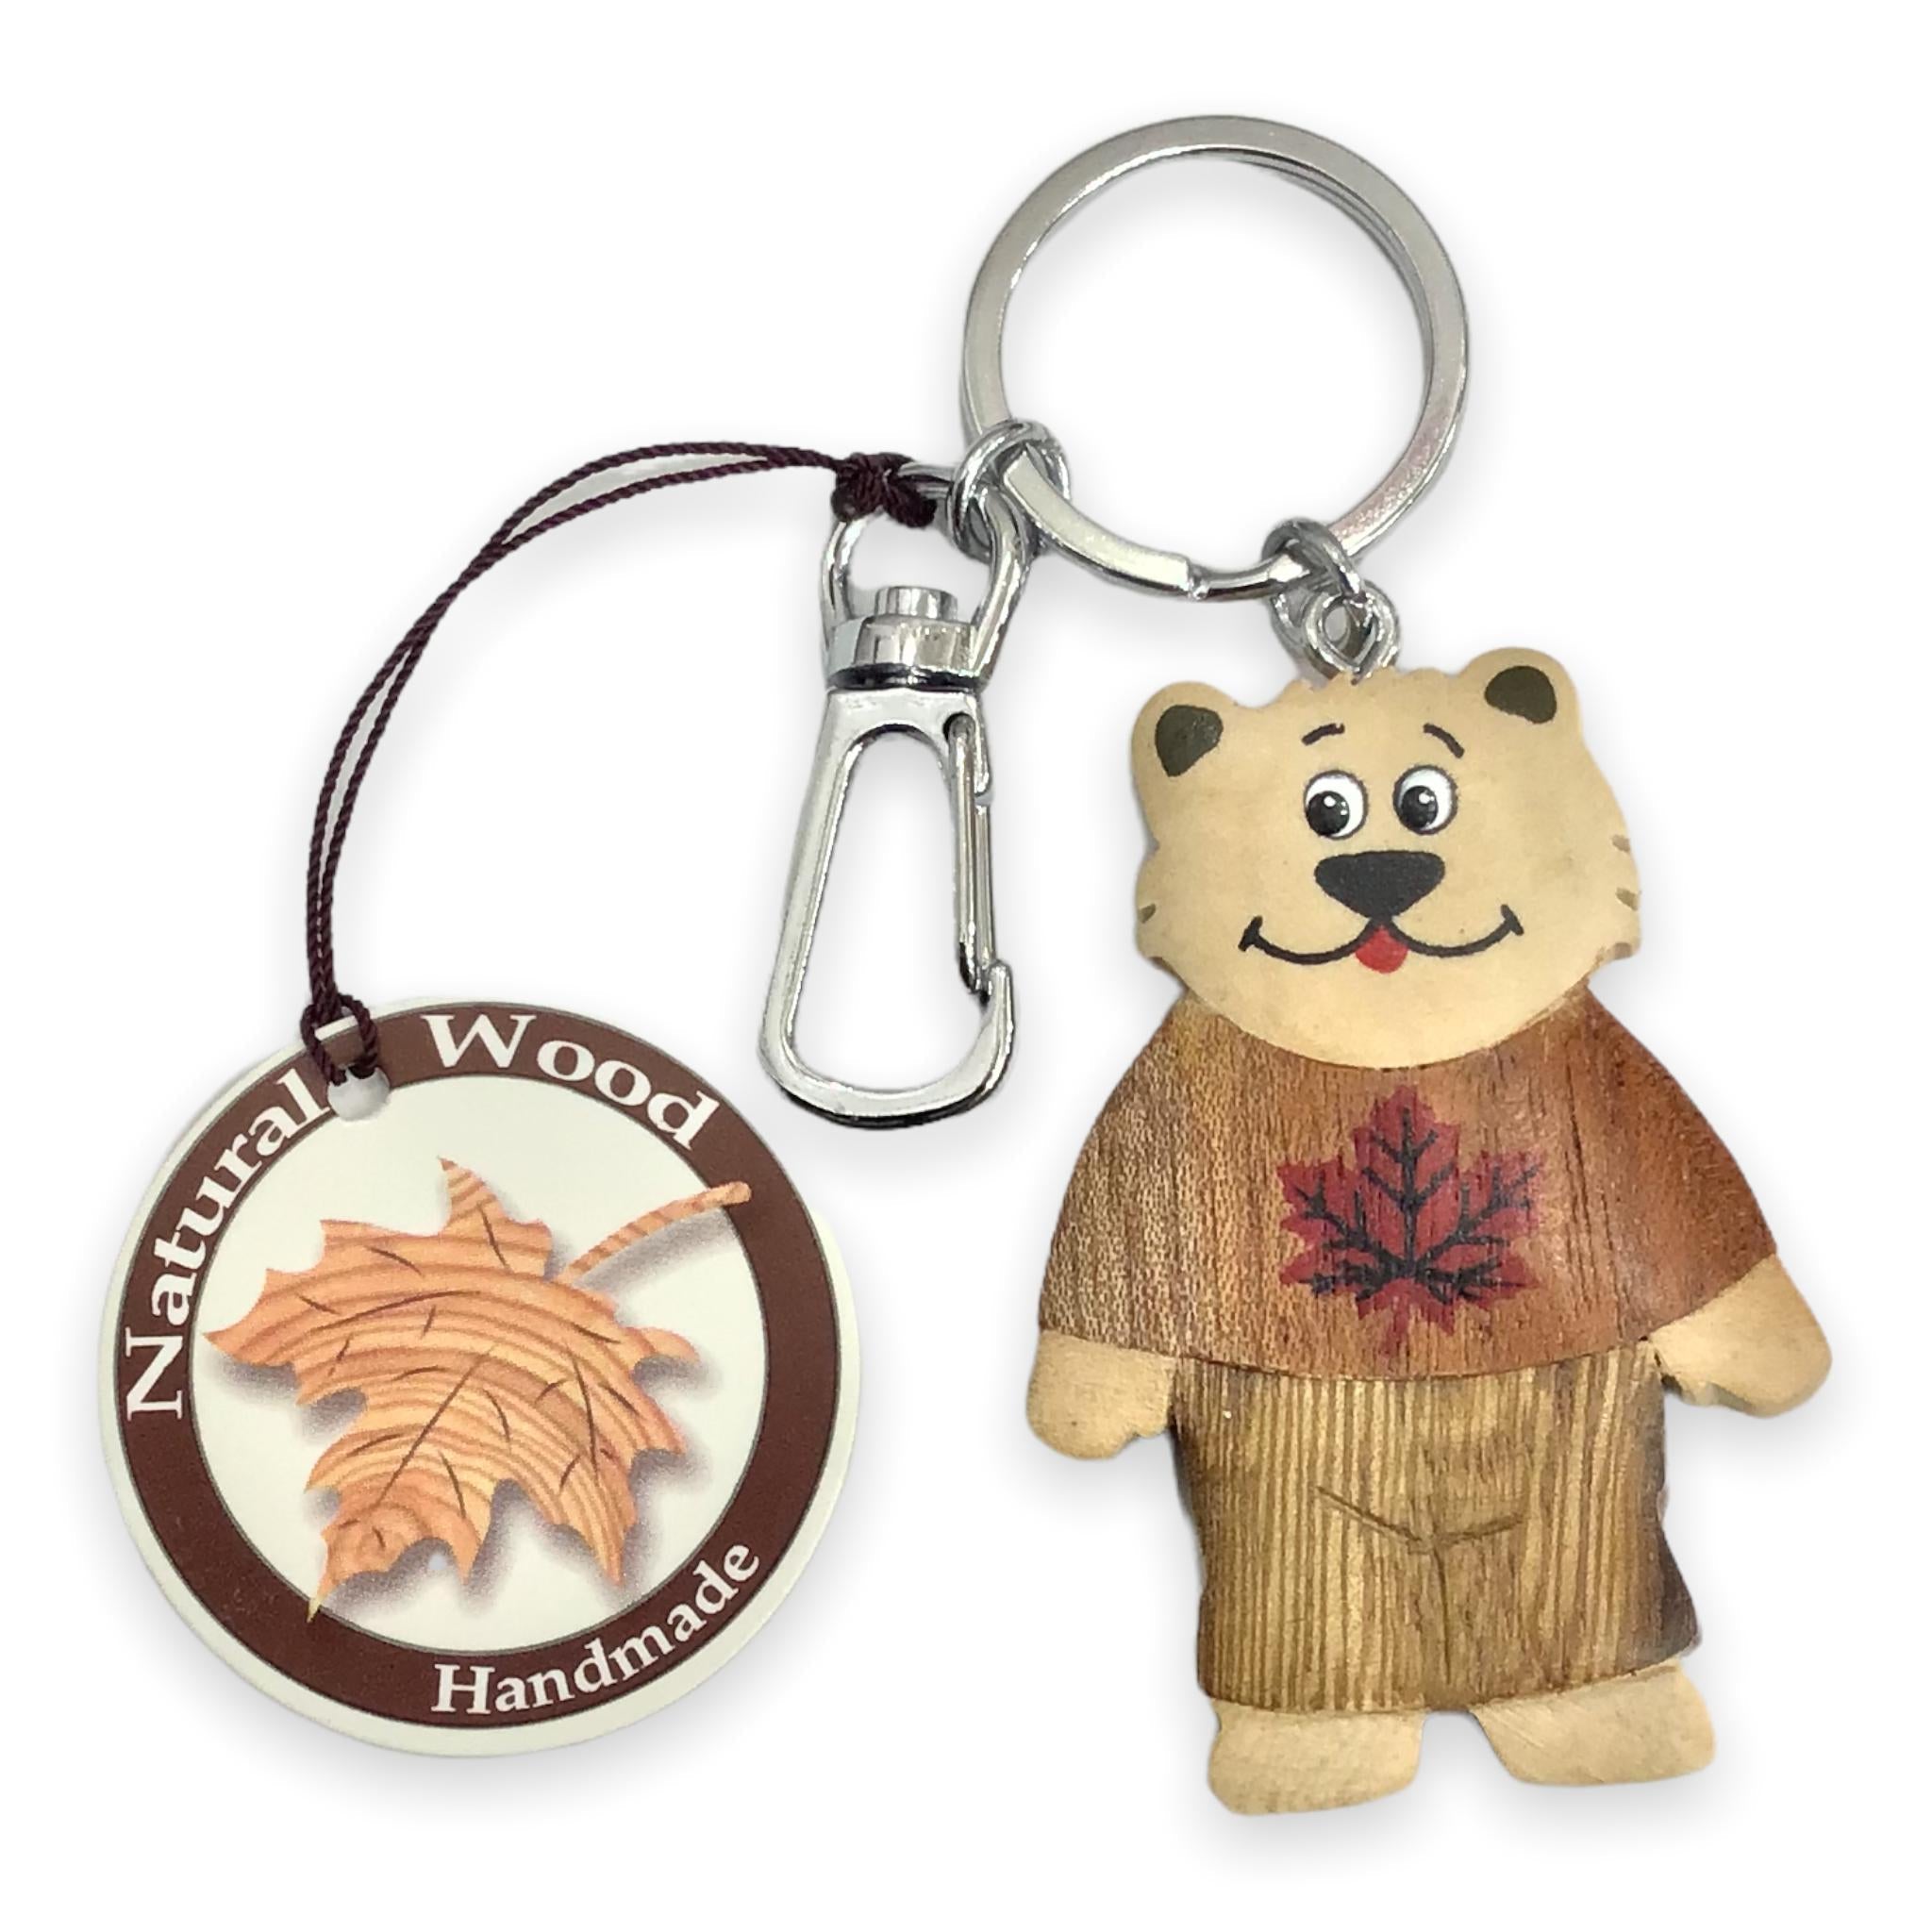 Canada Montreal Quebec Natural Wooden Key Ring Keychain Round Square Anti Lost Wood Accessories